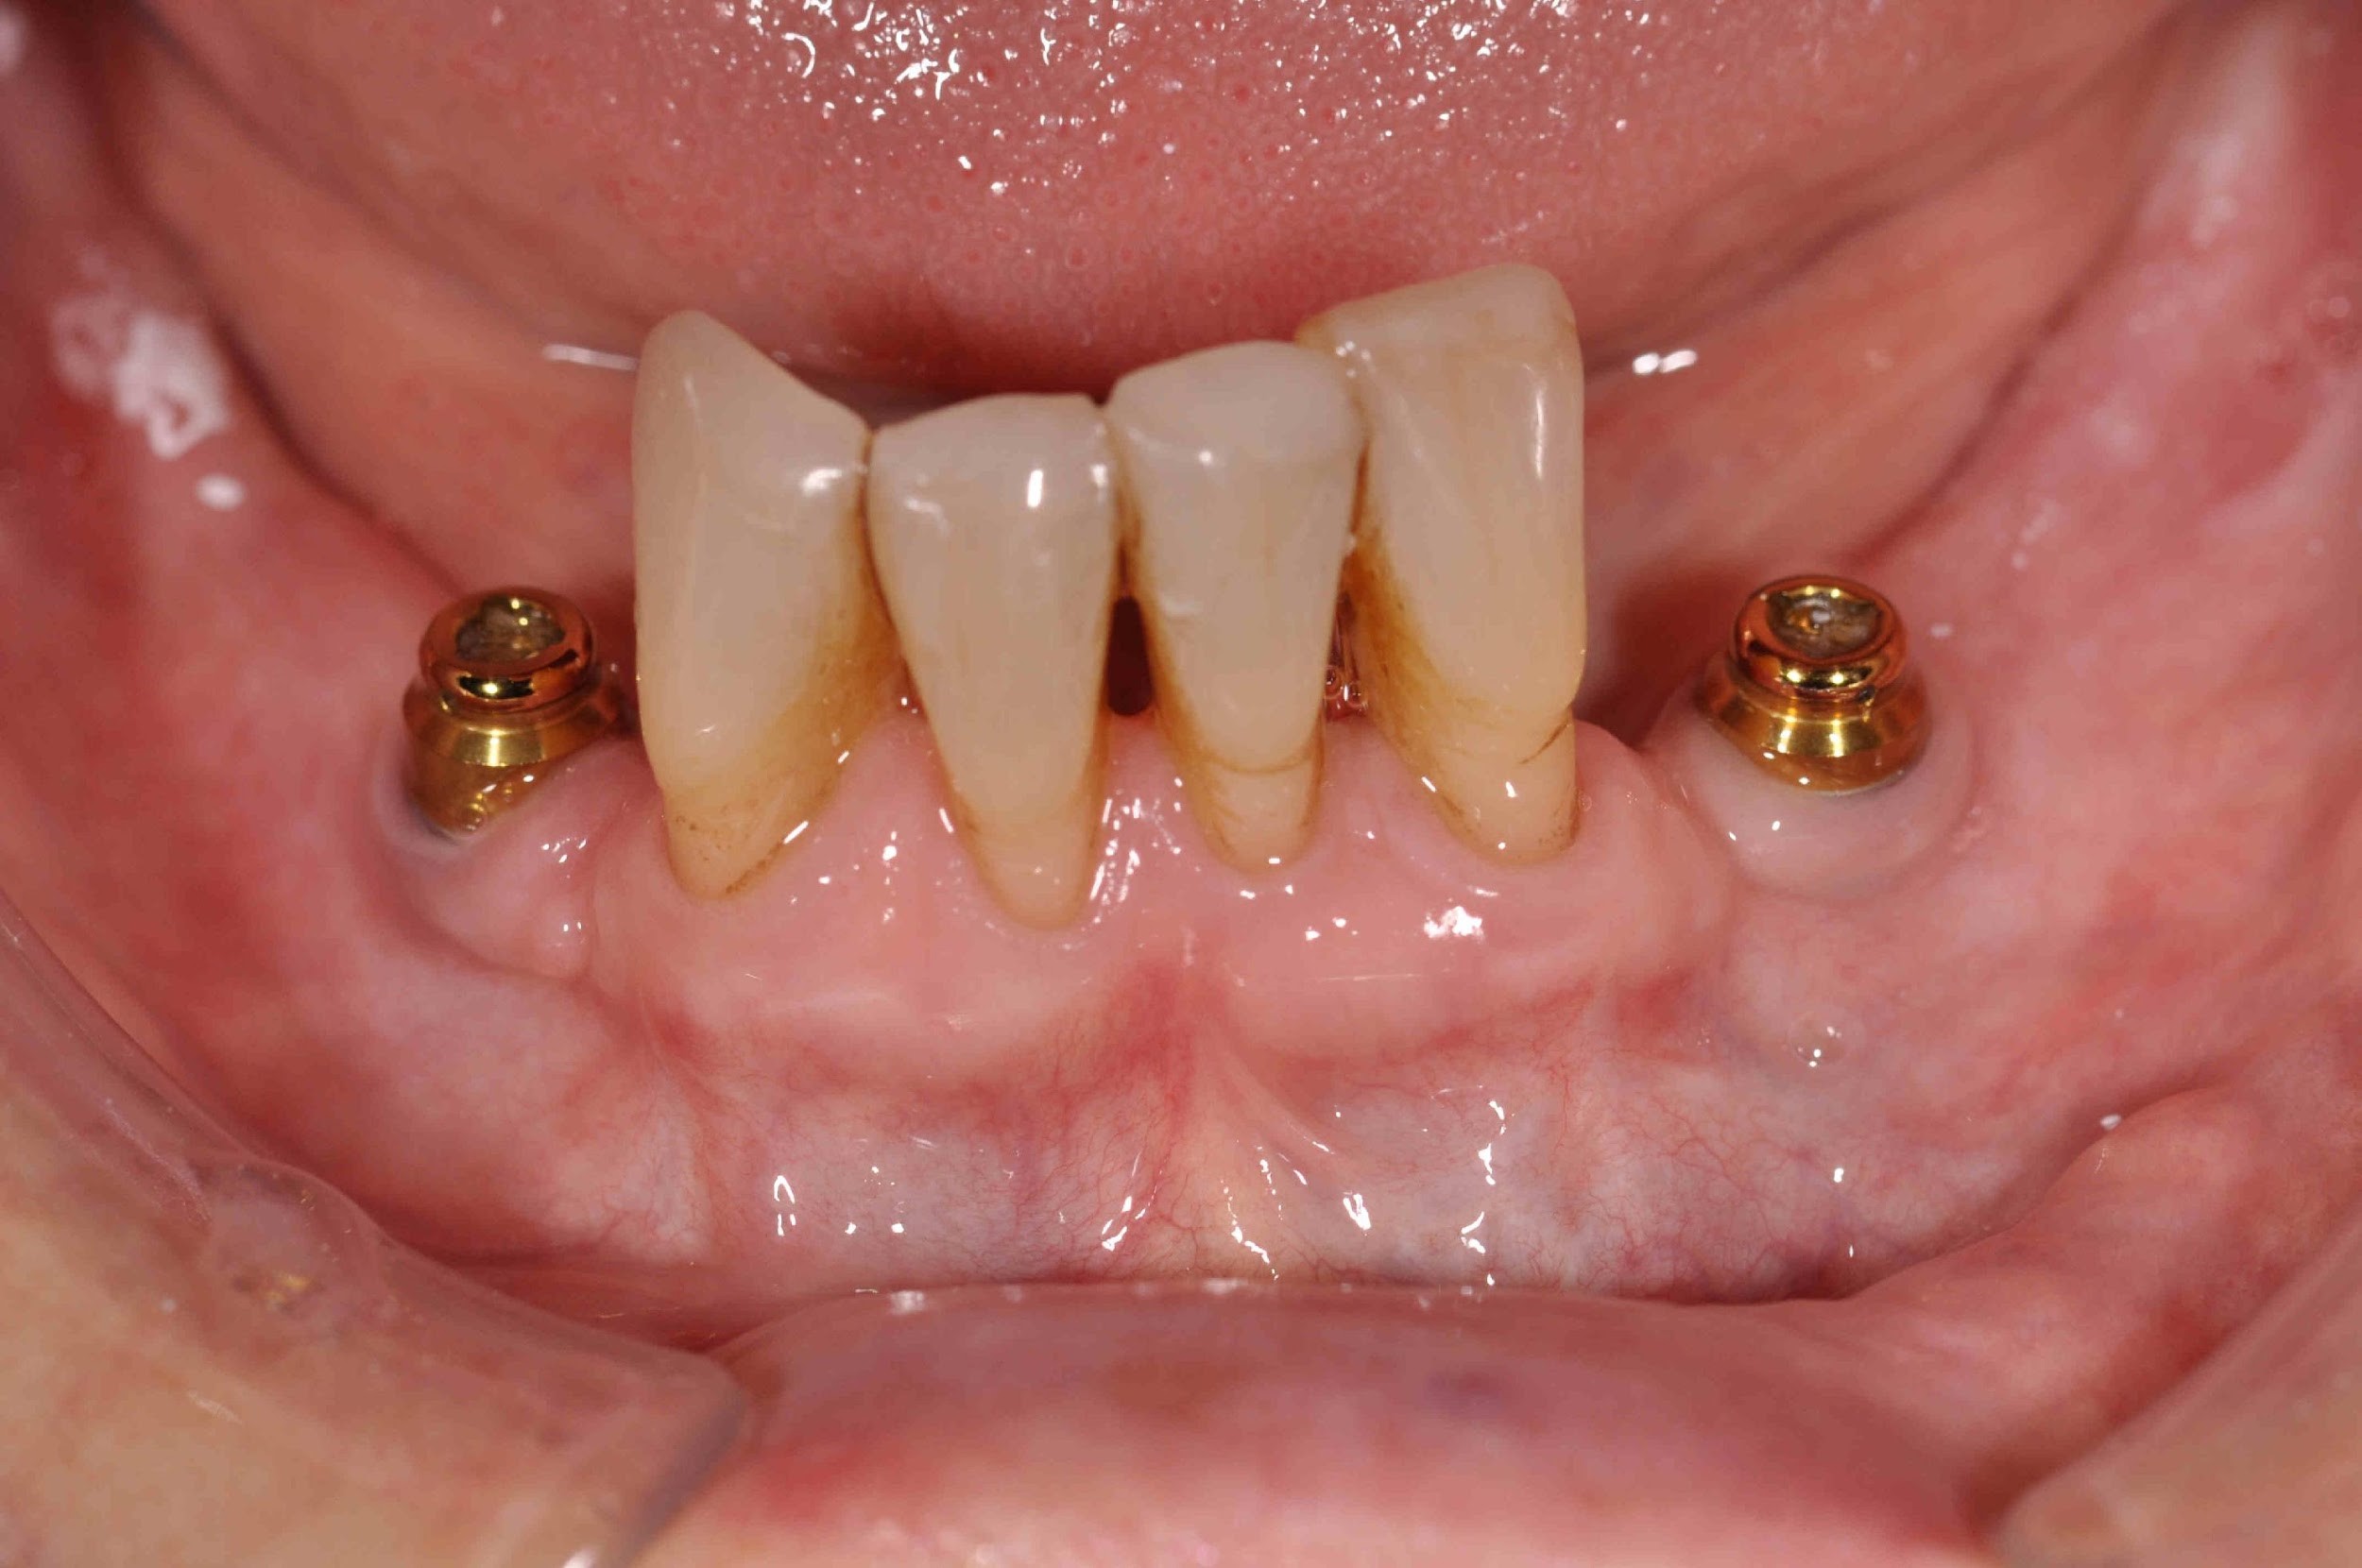 Healthy periodontal and peri-implant tissues